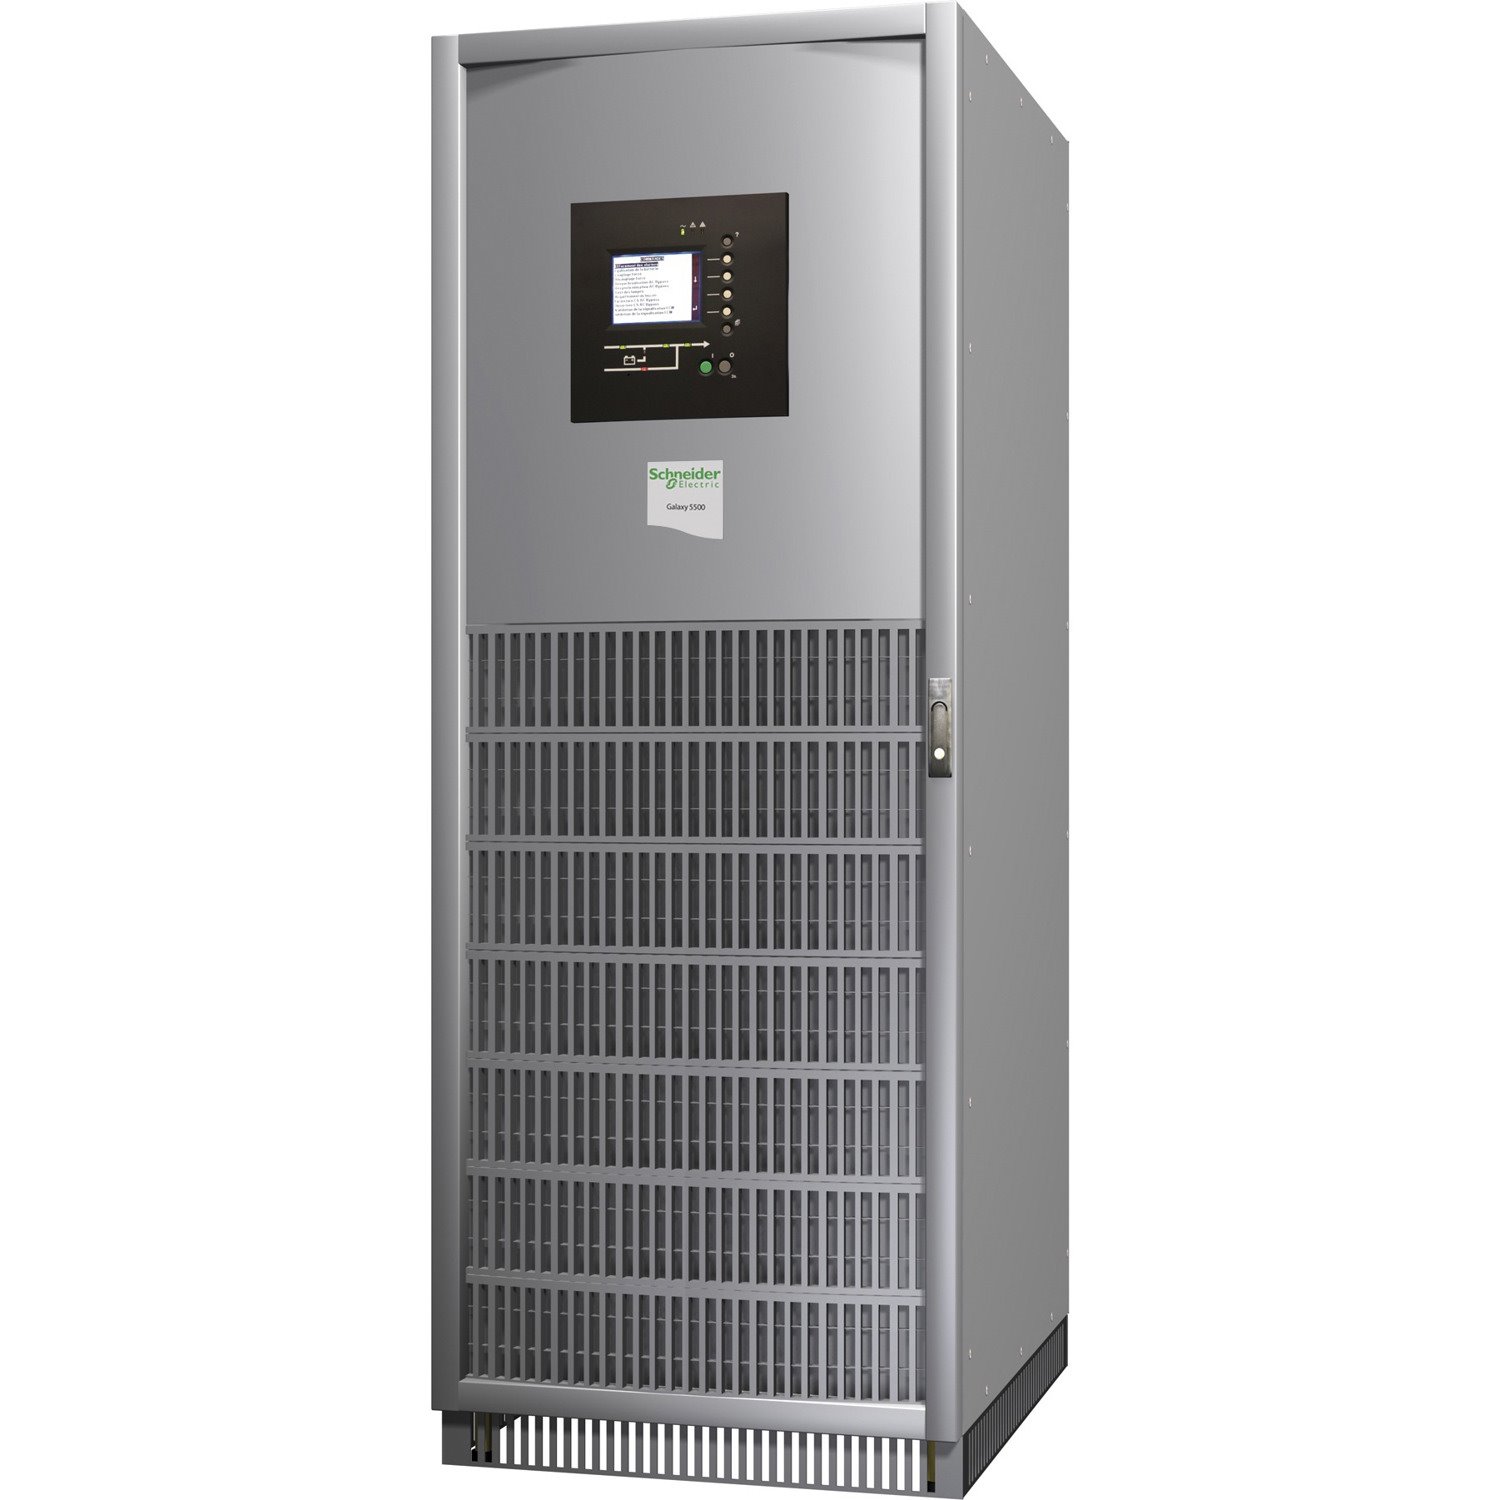 APC by Schneider Electric Galaxy 5500 Double Conversion Online UPS - 60 kVA